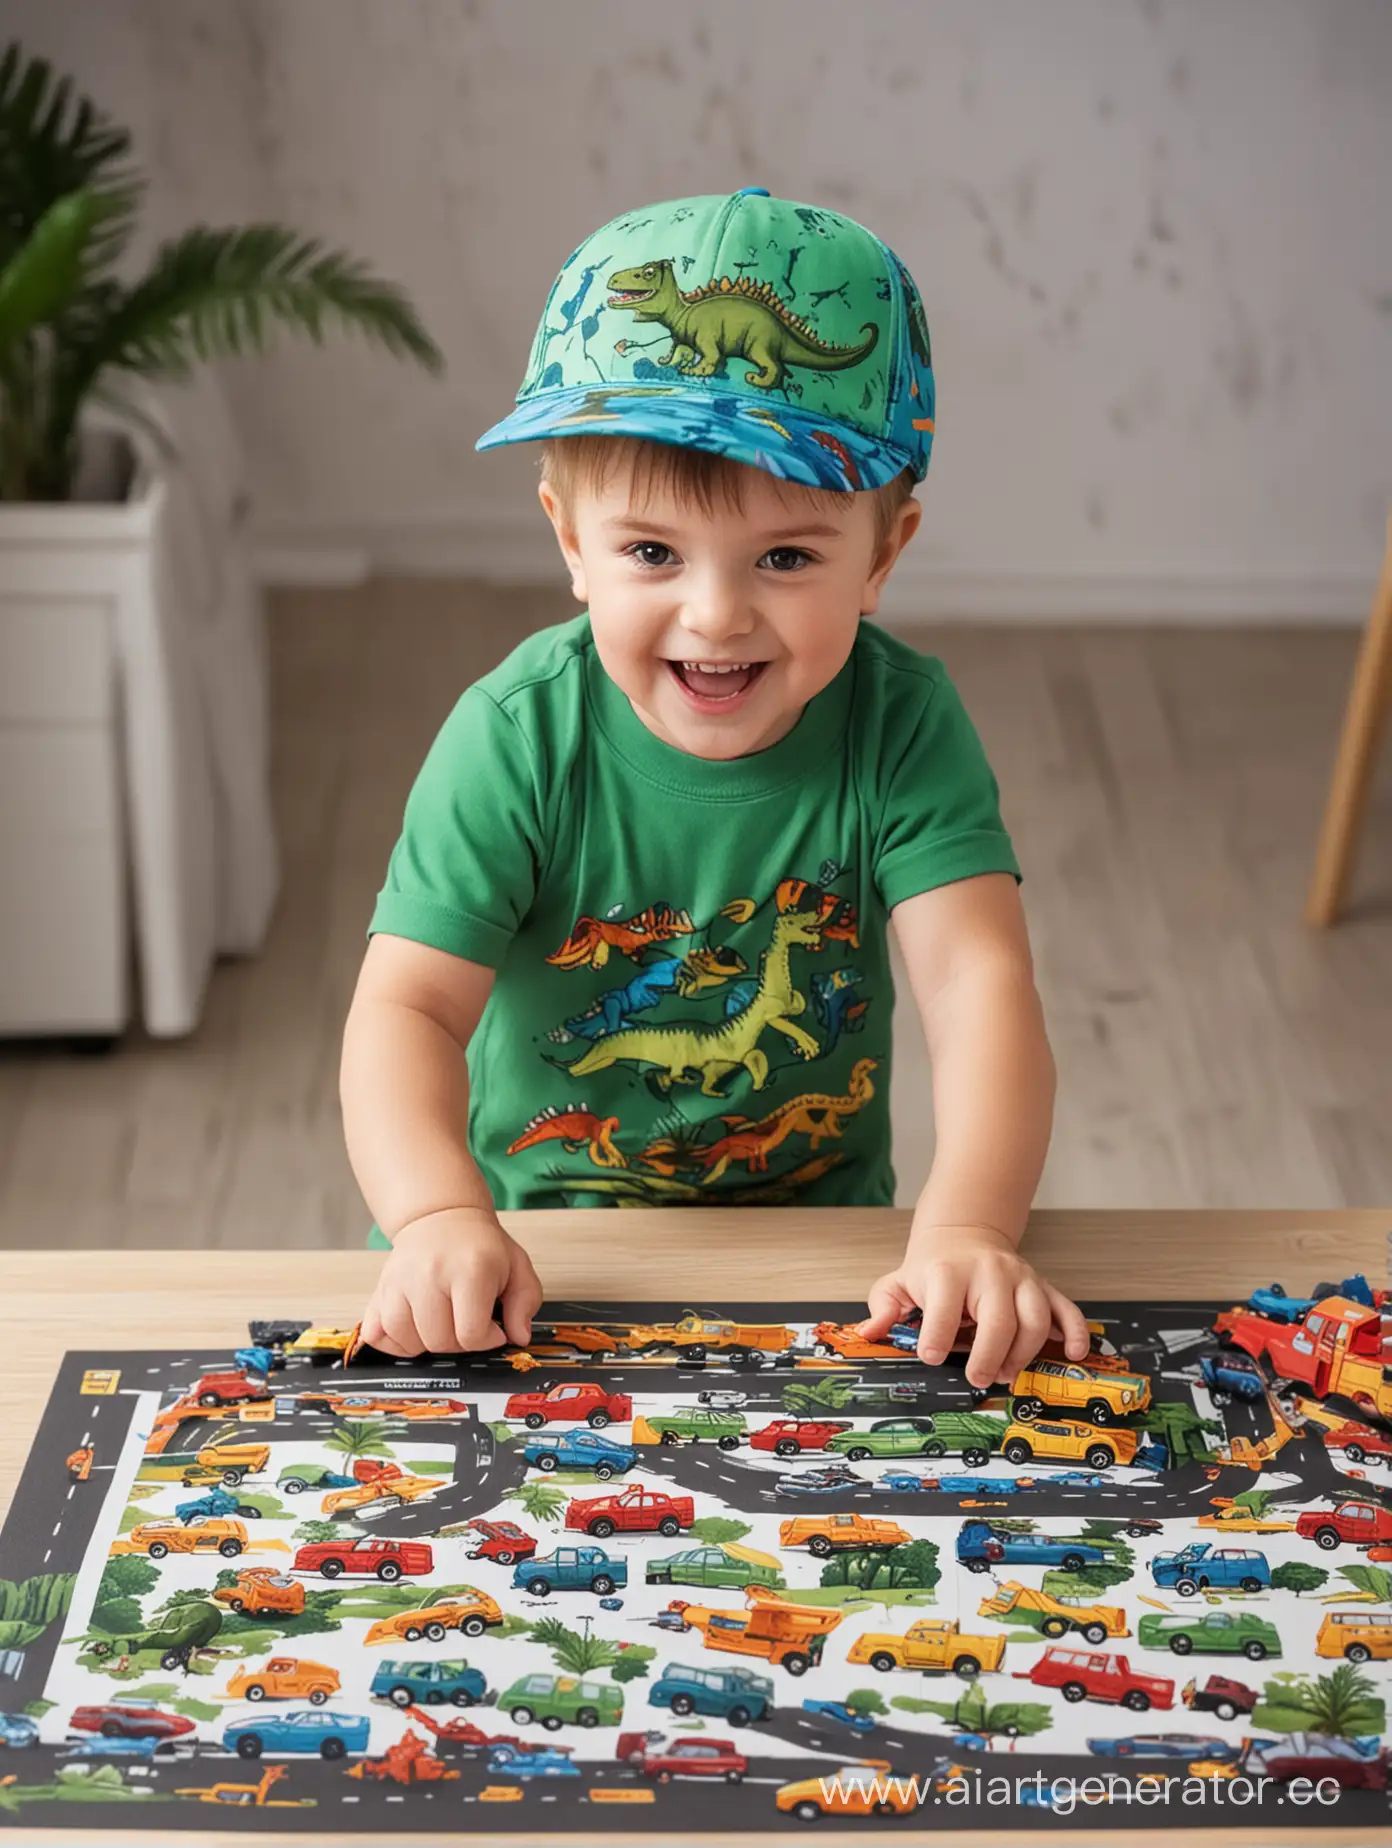 Joyful-Child-in-DinosaurThemed-Cap-Engaging-with-Toy-Cars-at-a-Table